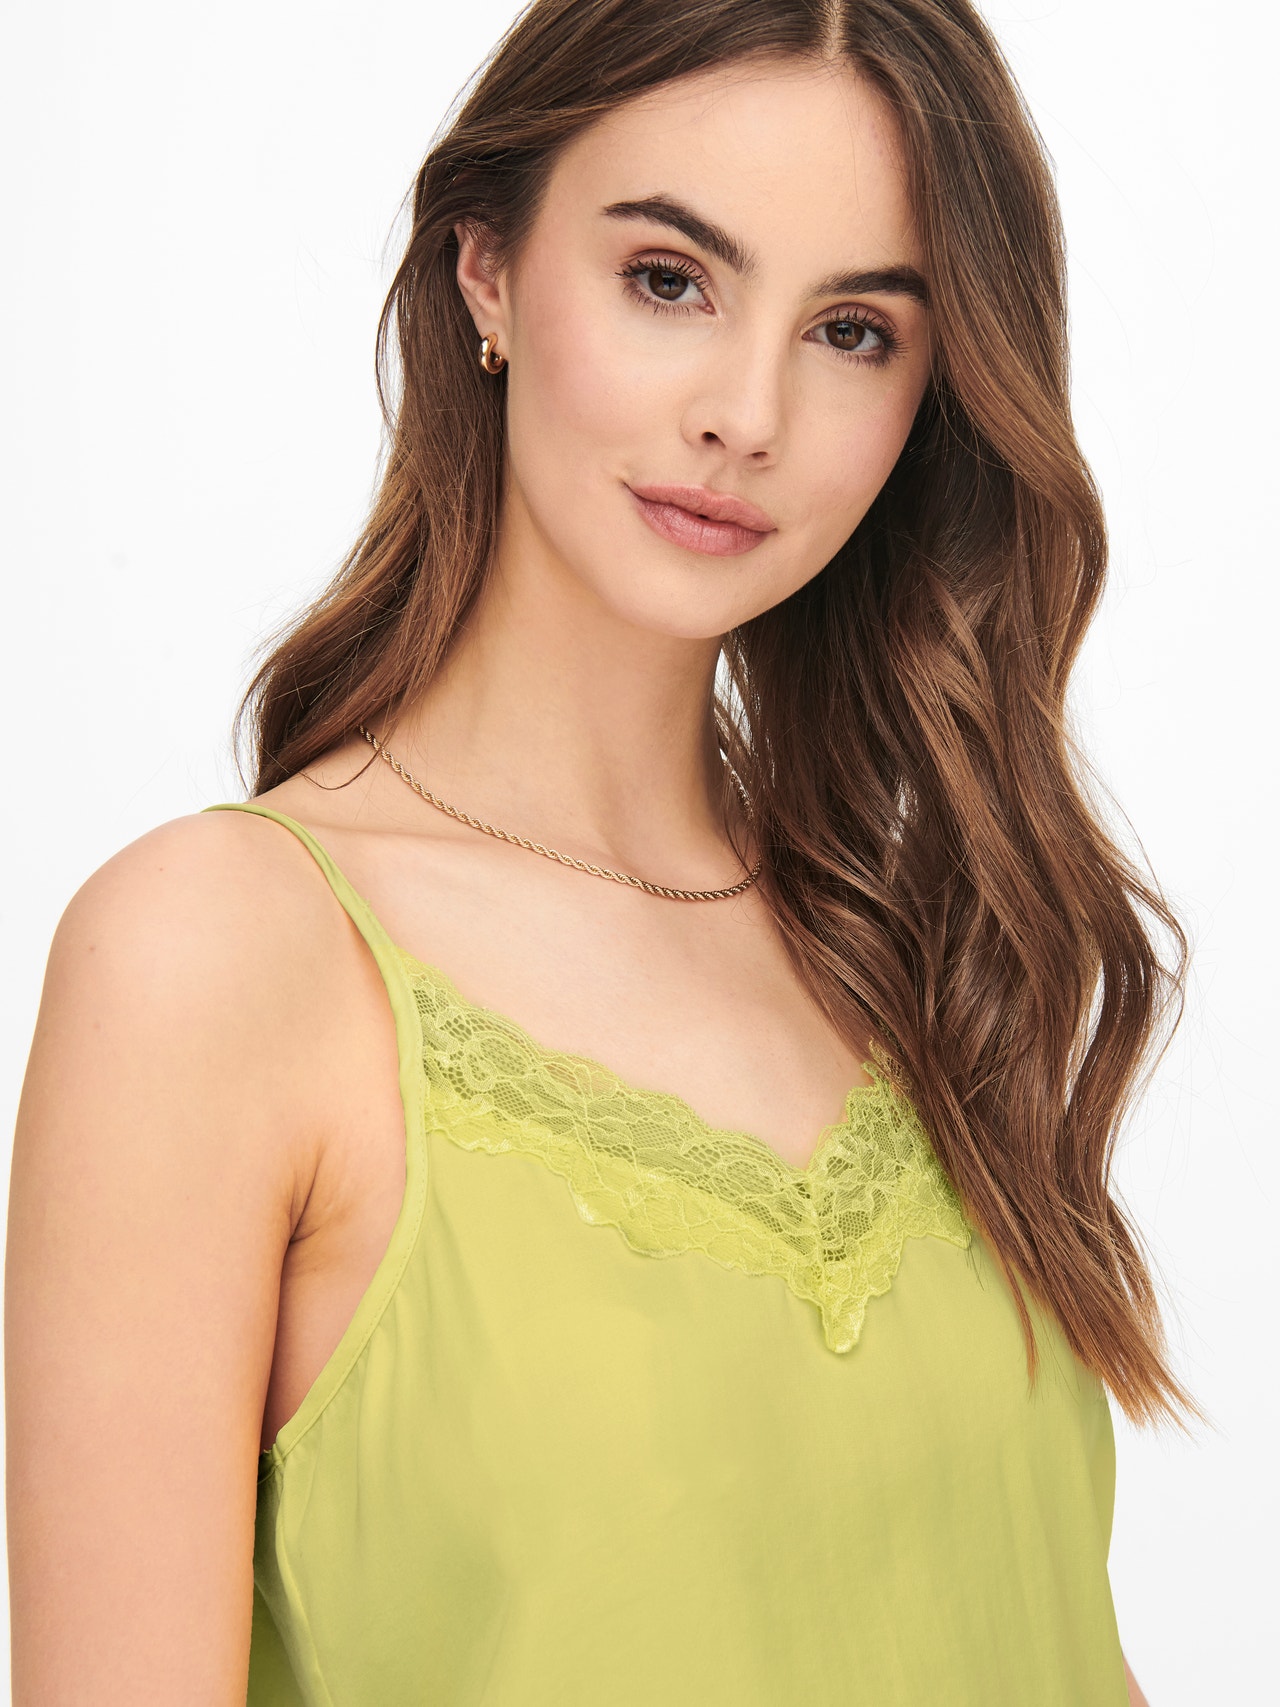 ONLY Lace Sleeveless Top -Yellow Cream - 15233143